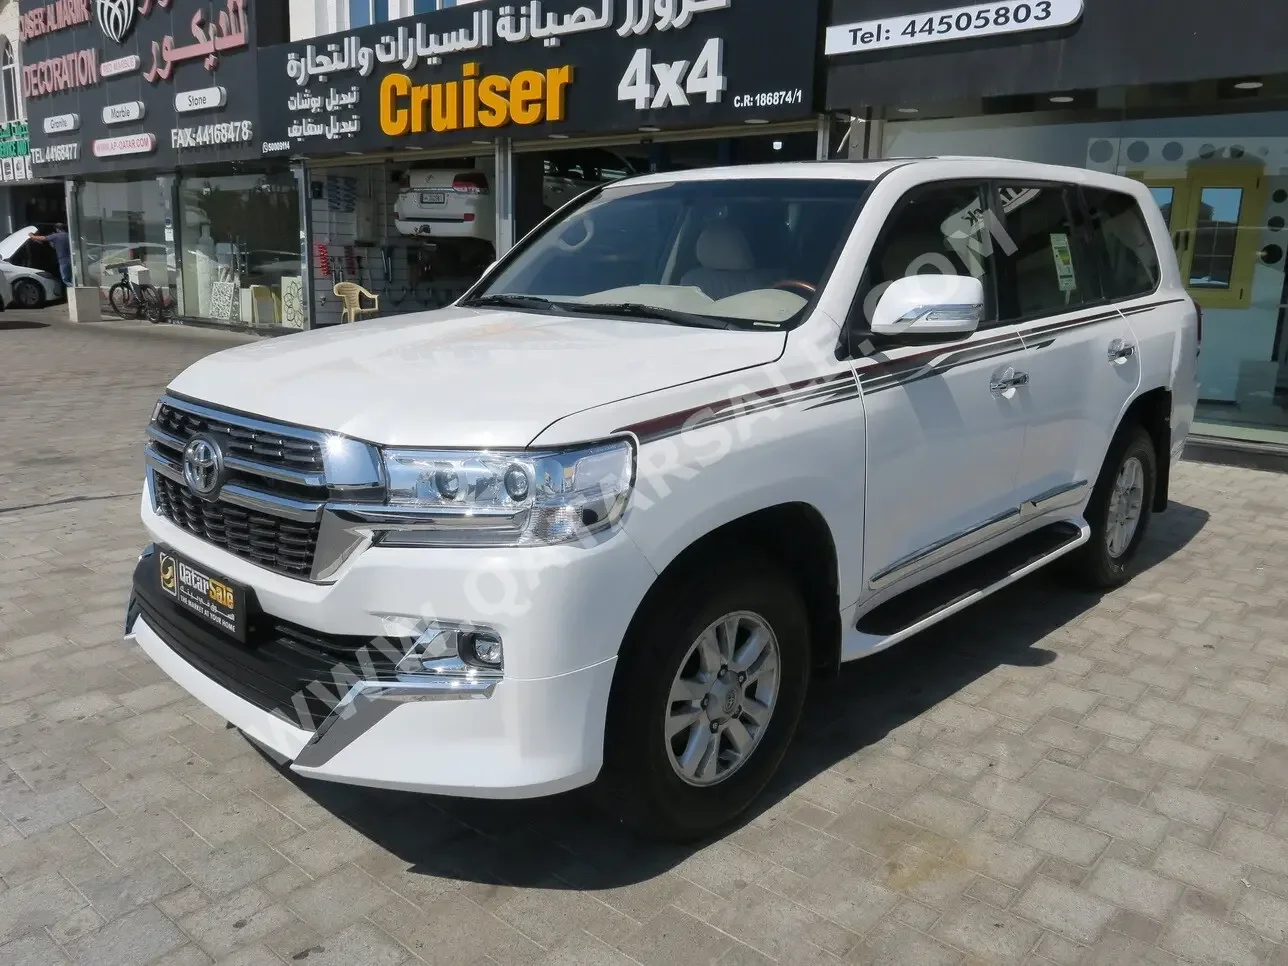  Toyota  Land Cruiser  GX  2011  Automatic  380,000 Km  6 Cylinder  Four Wheel Drive (4WD)  SUV  White  With Warranty